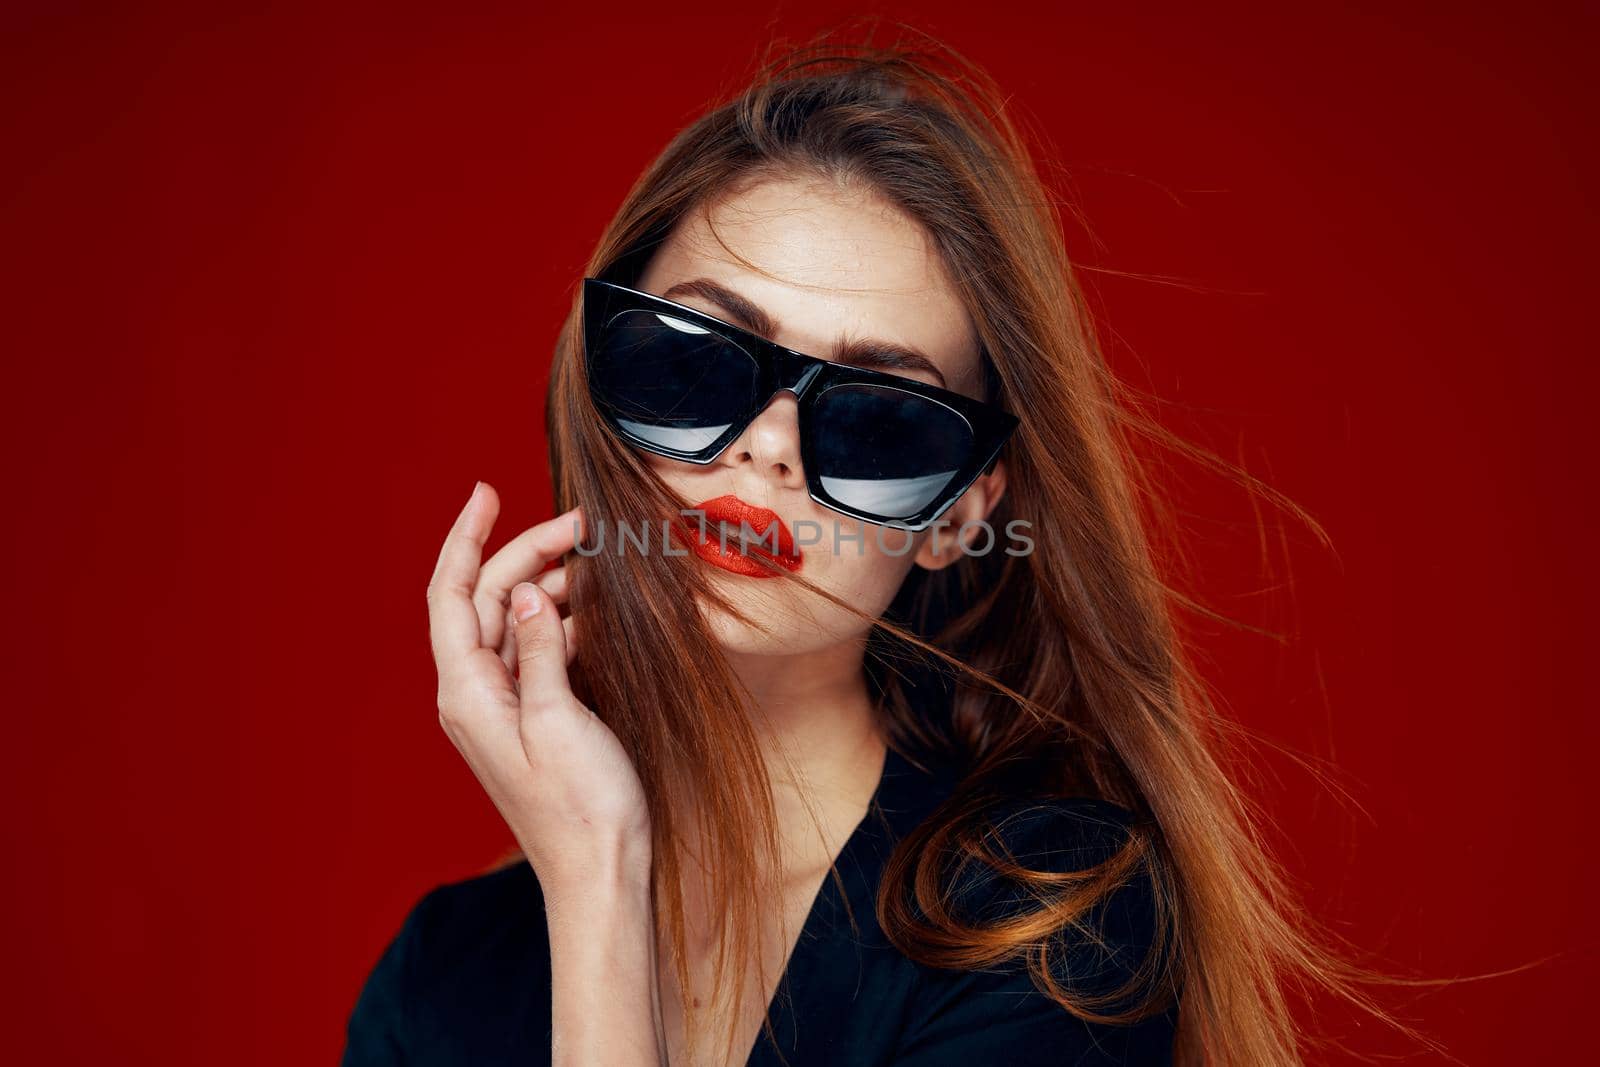 cheerful fashionable woman wearing sunglasses red lips posing red background by Vichizh